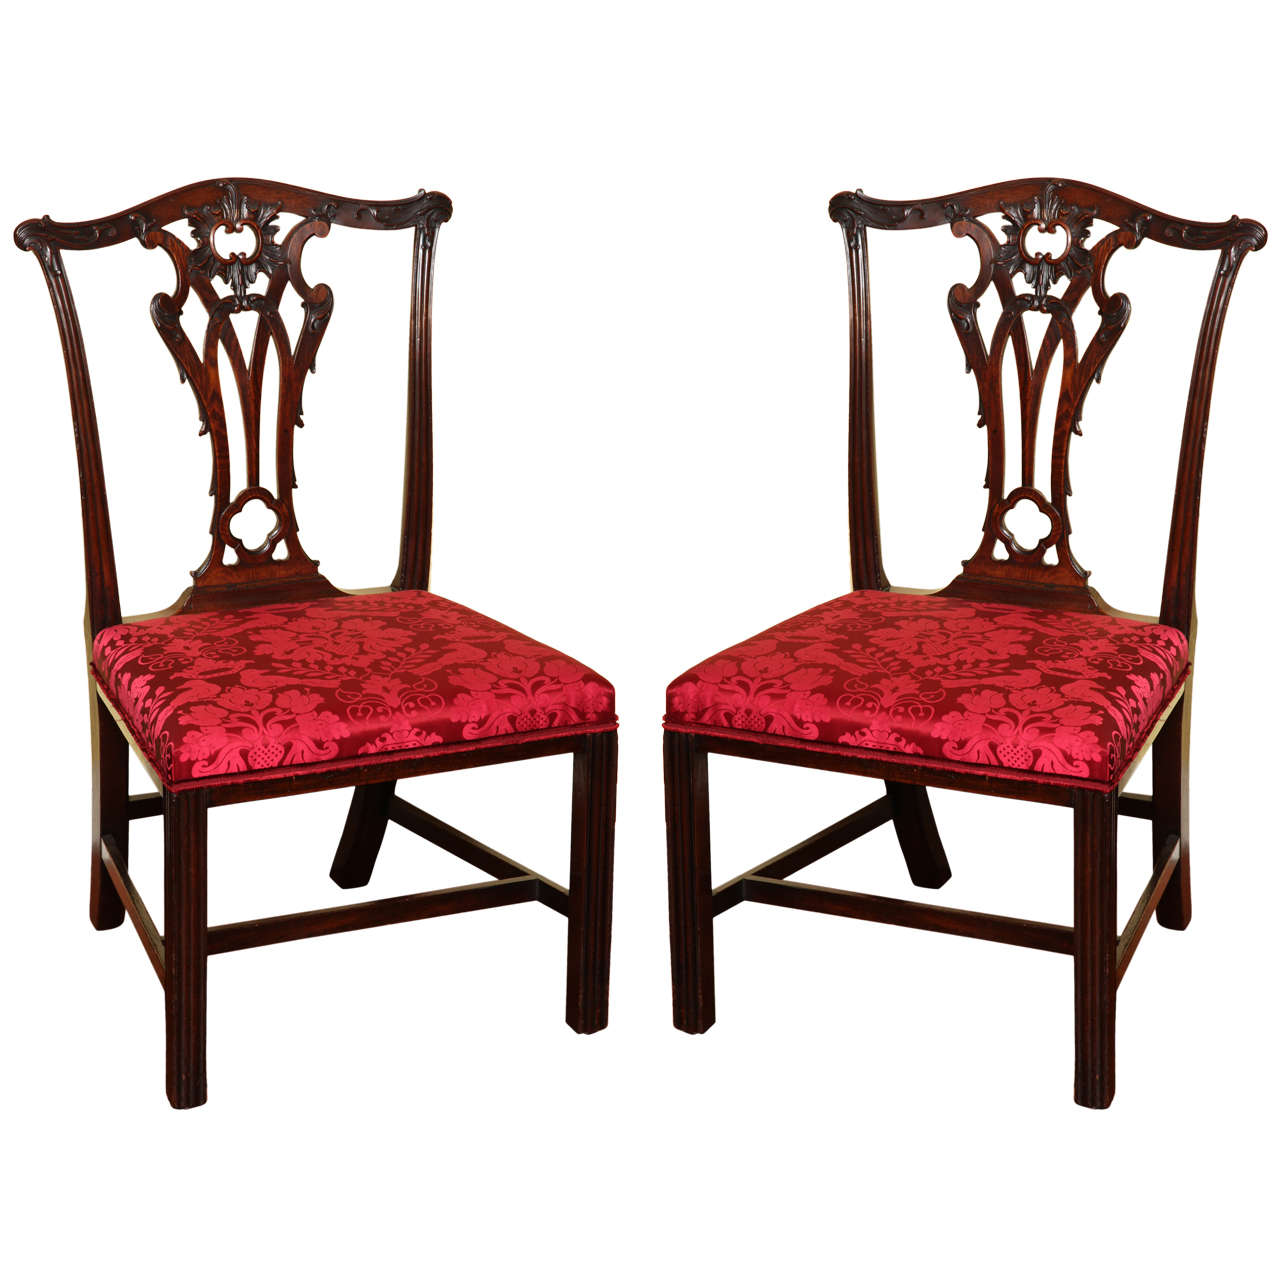 Set of Four Antique Chippendale Period Mahogany Game Chairs, circa 1765 For Sale